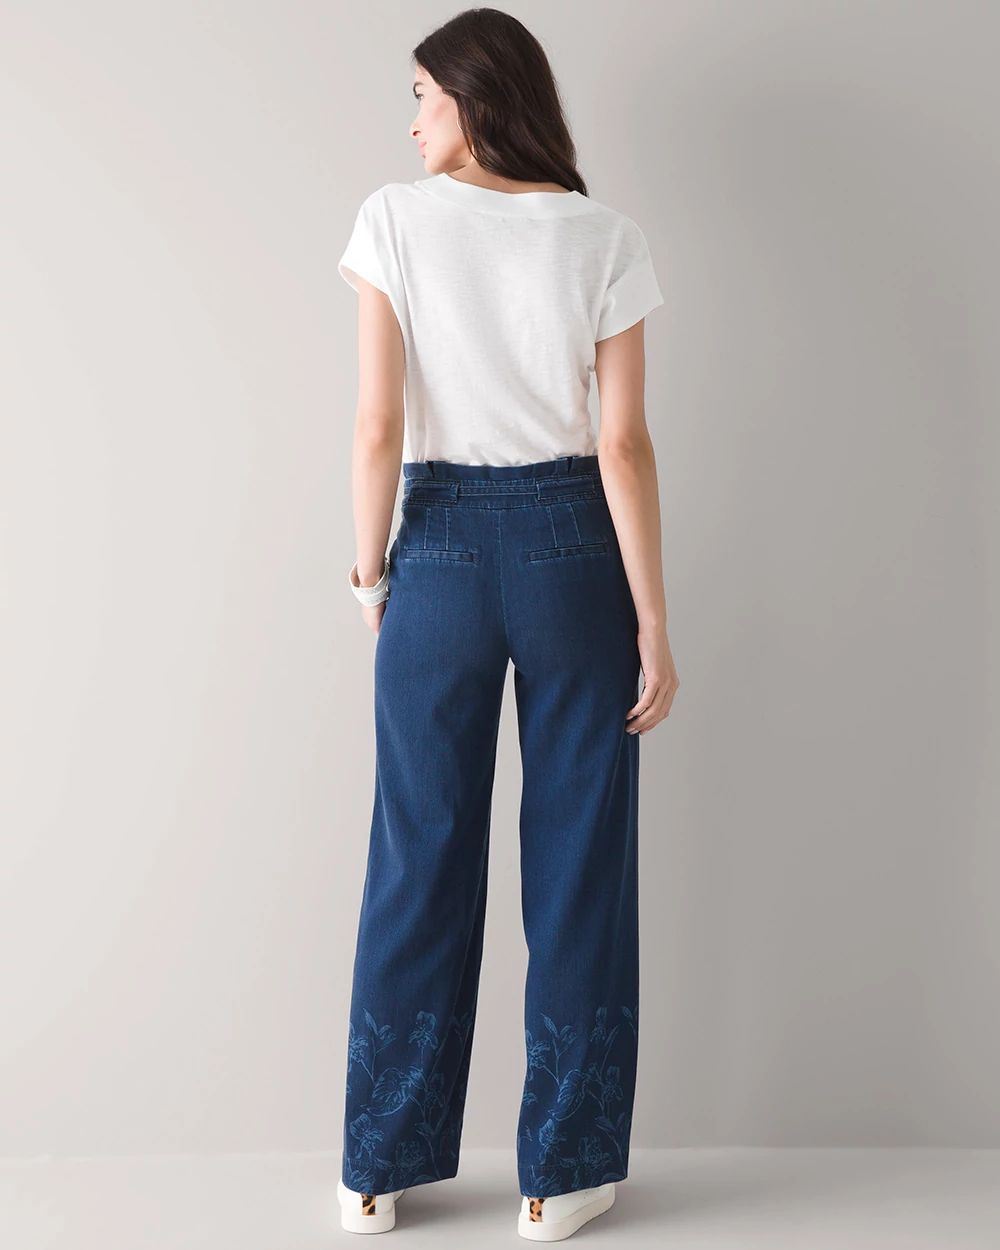 High-Rise Tassel-Belt Wide Leg Pant click to view larger image.